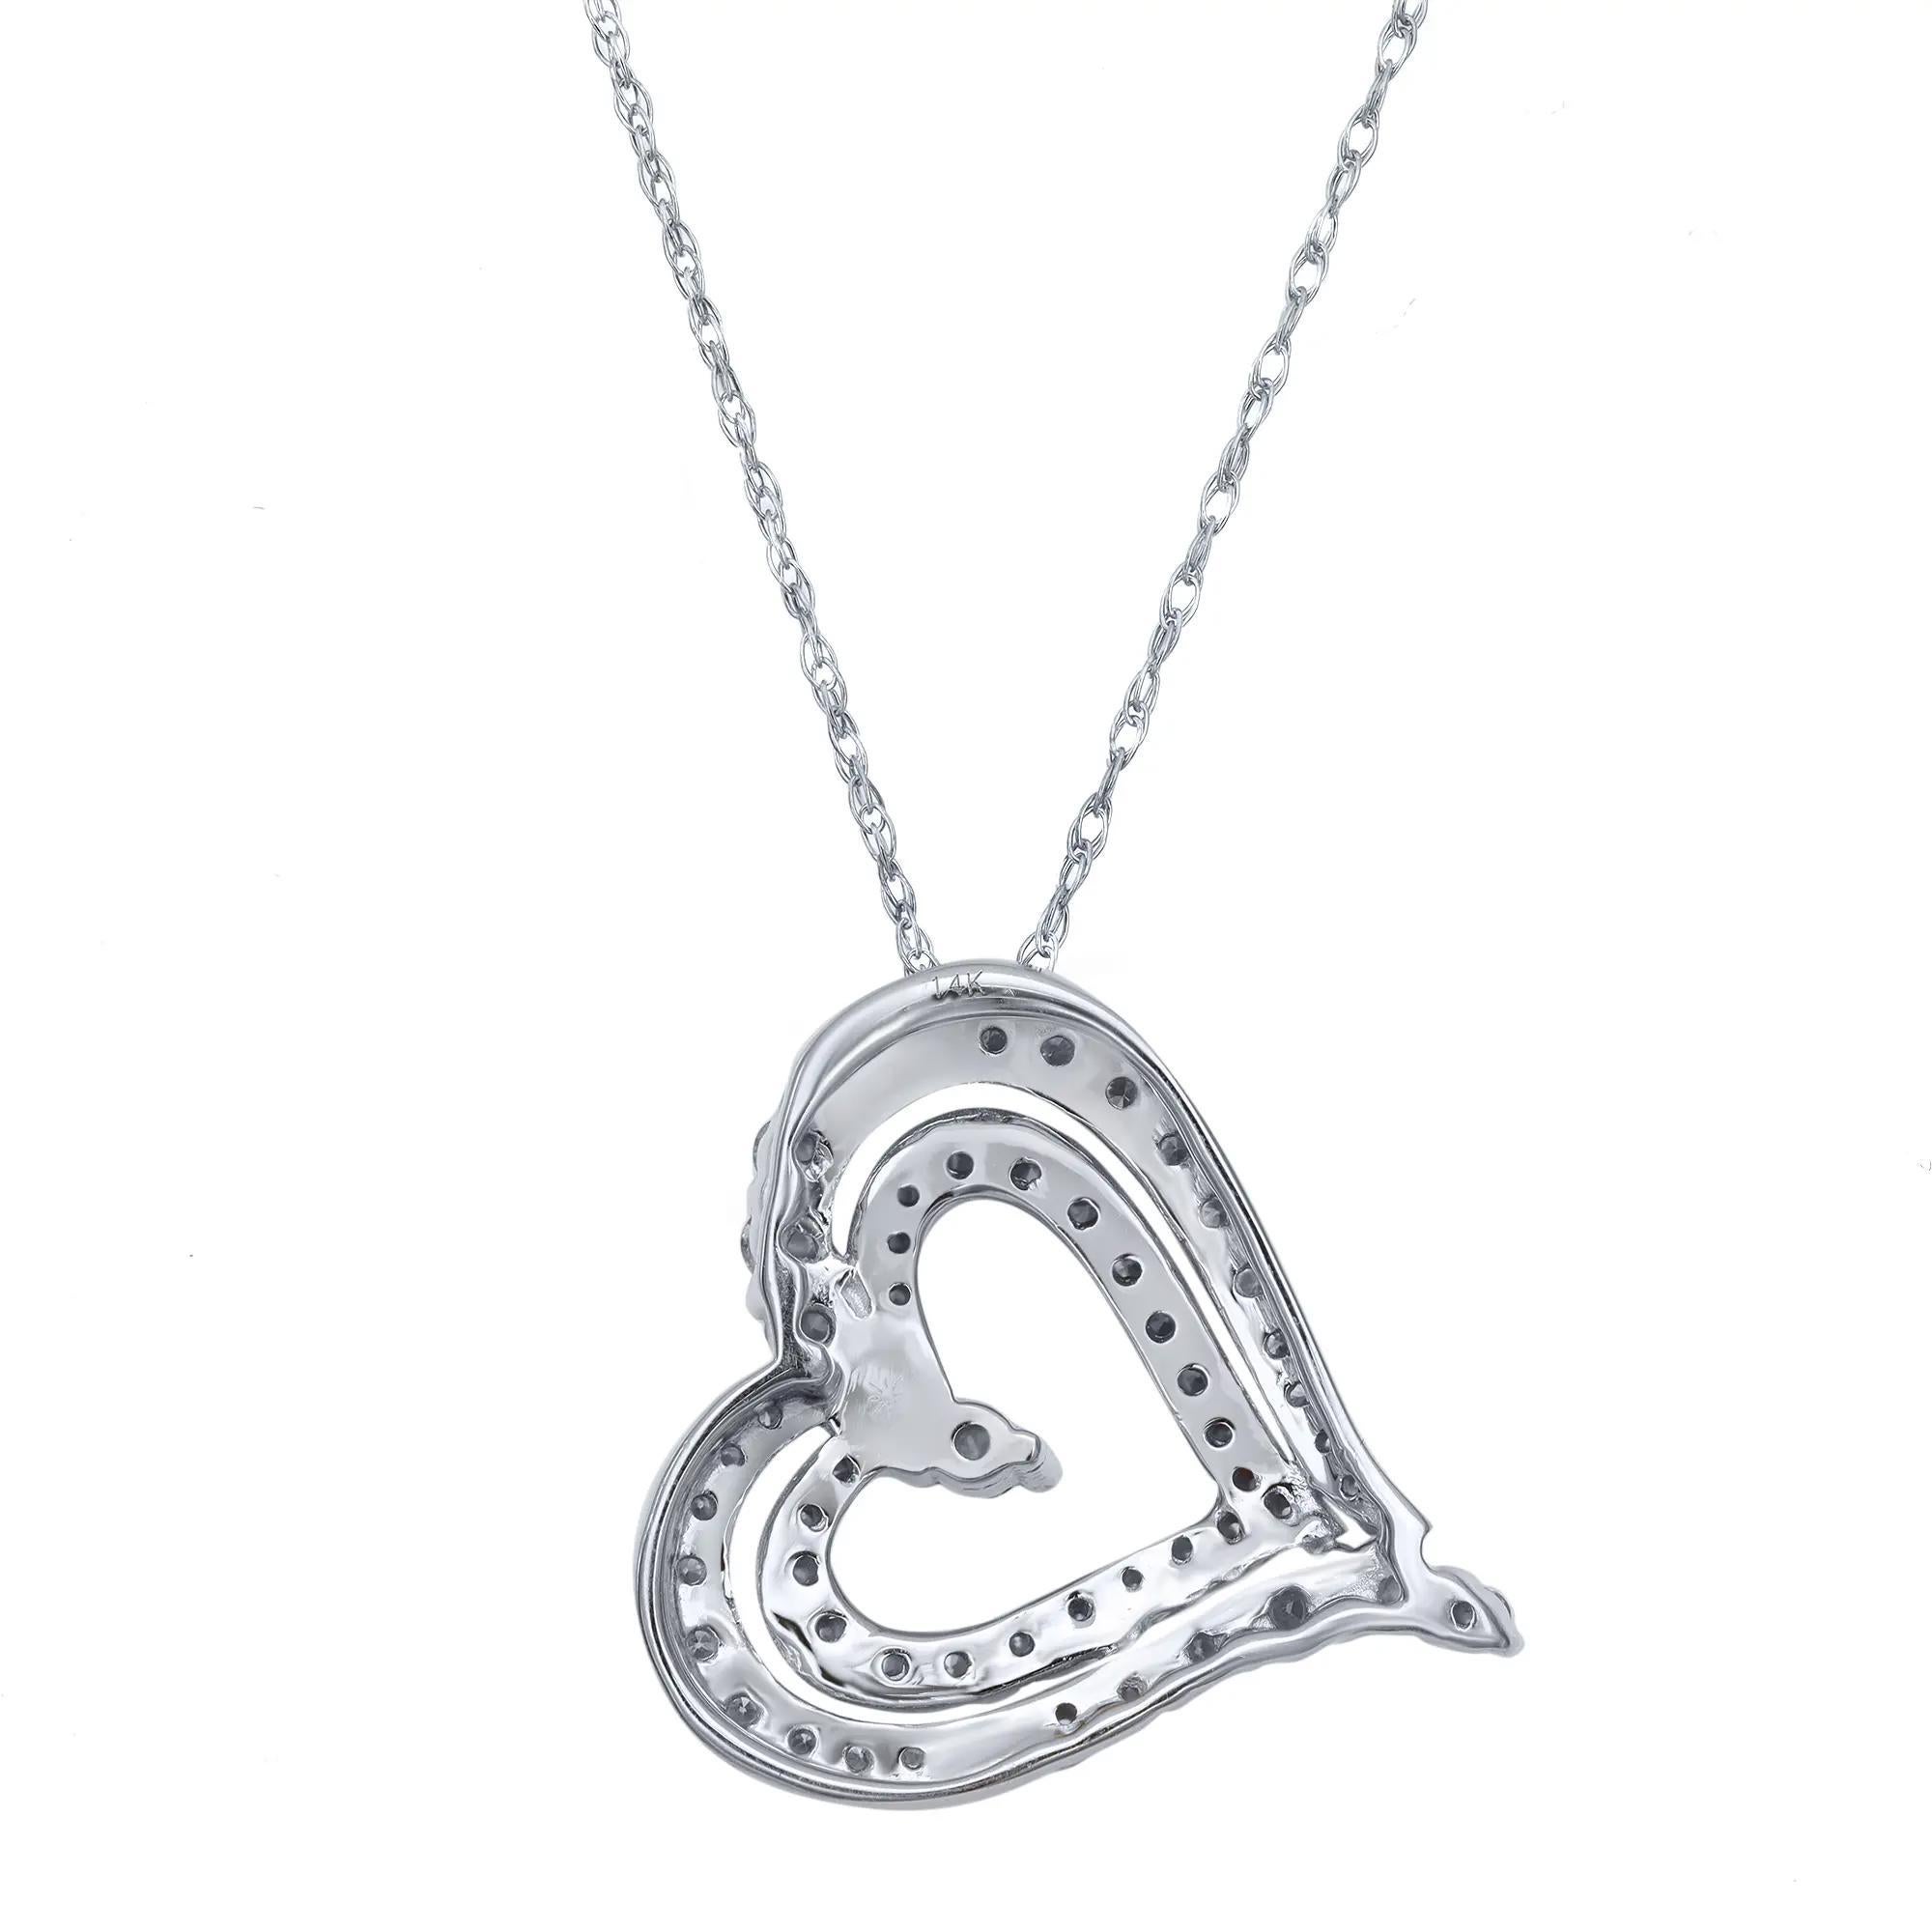 This stunning natural diamond heart pendant showcases prong set white sparkling round cut diamonds in a double heart-shaped cut out design. Crafted in 14K white gold. Total diamond weight: 0.50 carat. Each diamond is of VS-SI clarity and H-I color.